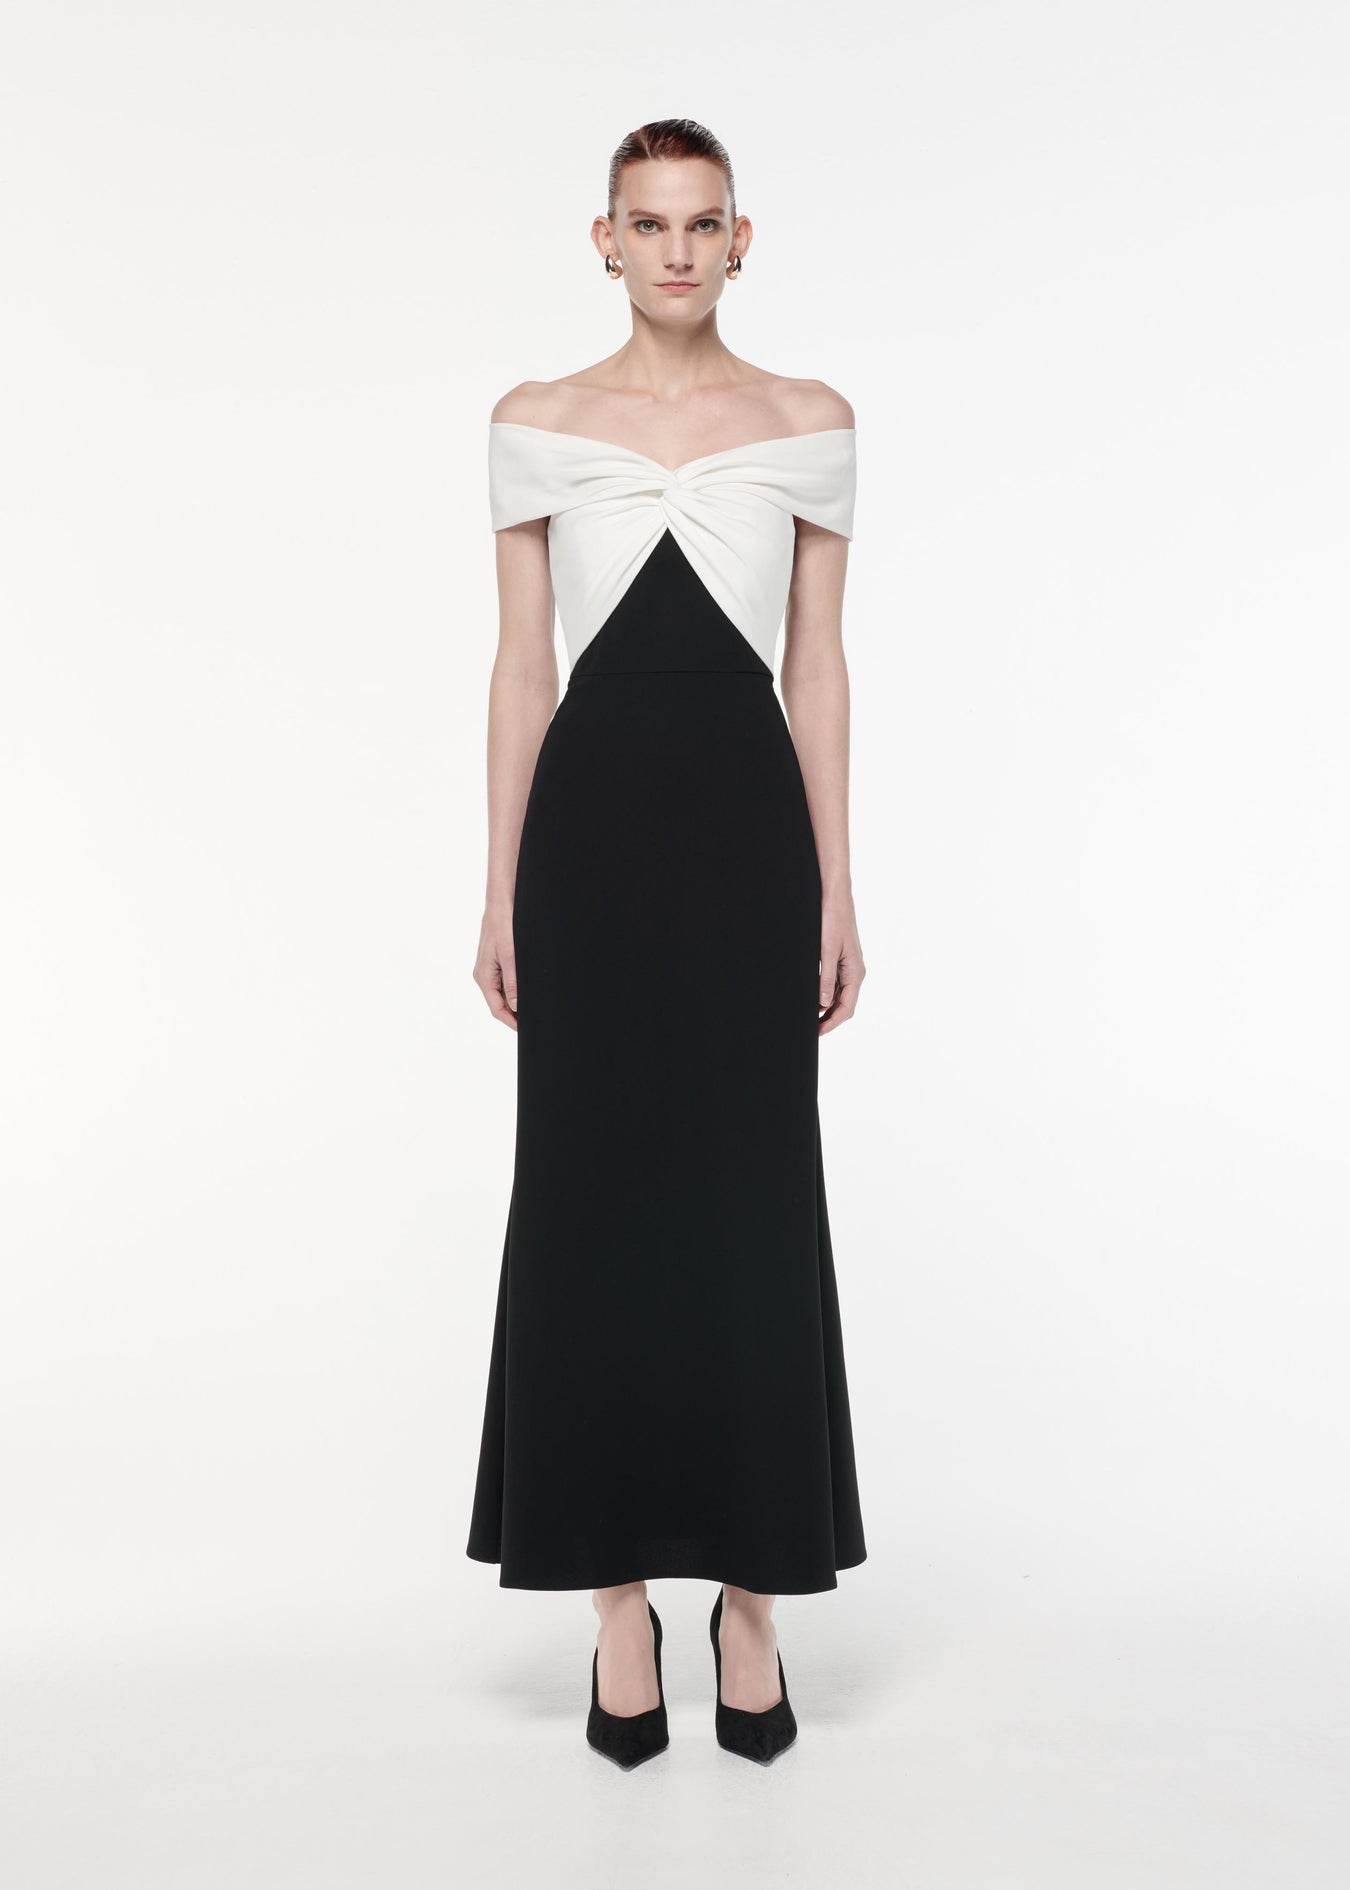 A photograph of a woman wearing a Off The Shoulder Light Cady Maxi Dress in Monochrome